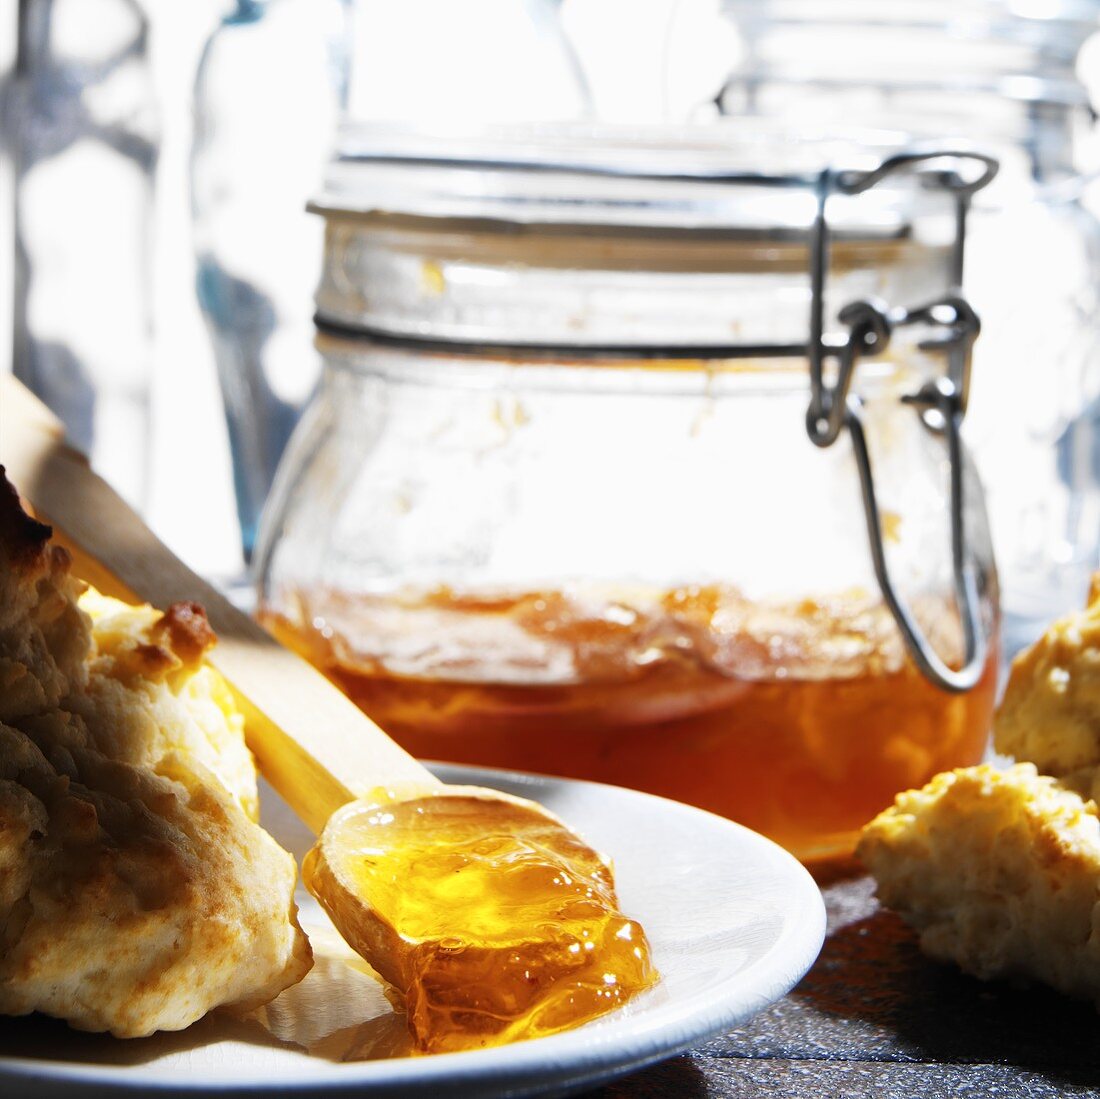 Homemade Canned Peach Preserves with Biscuits